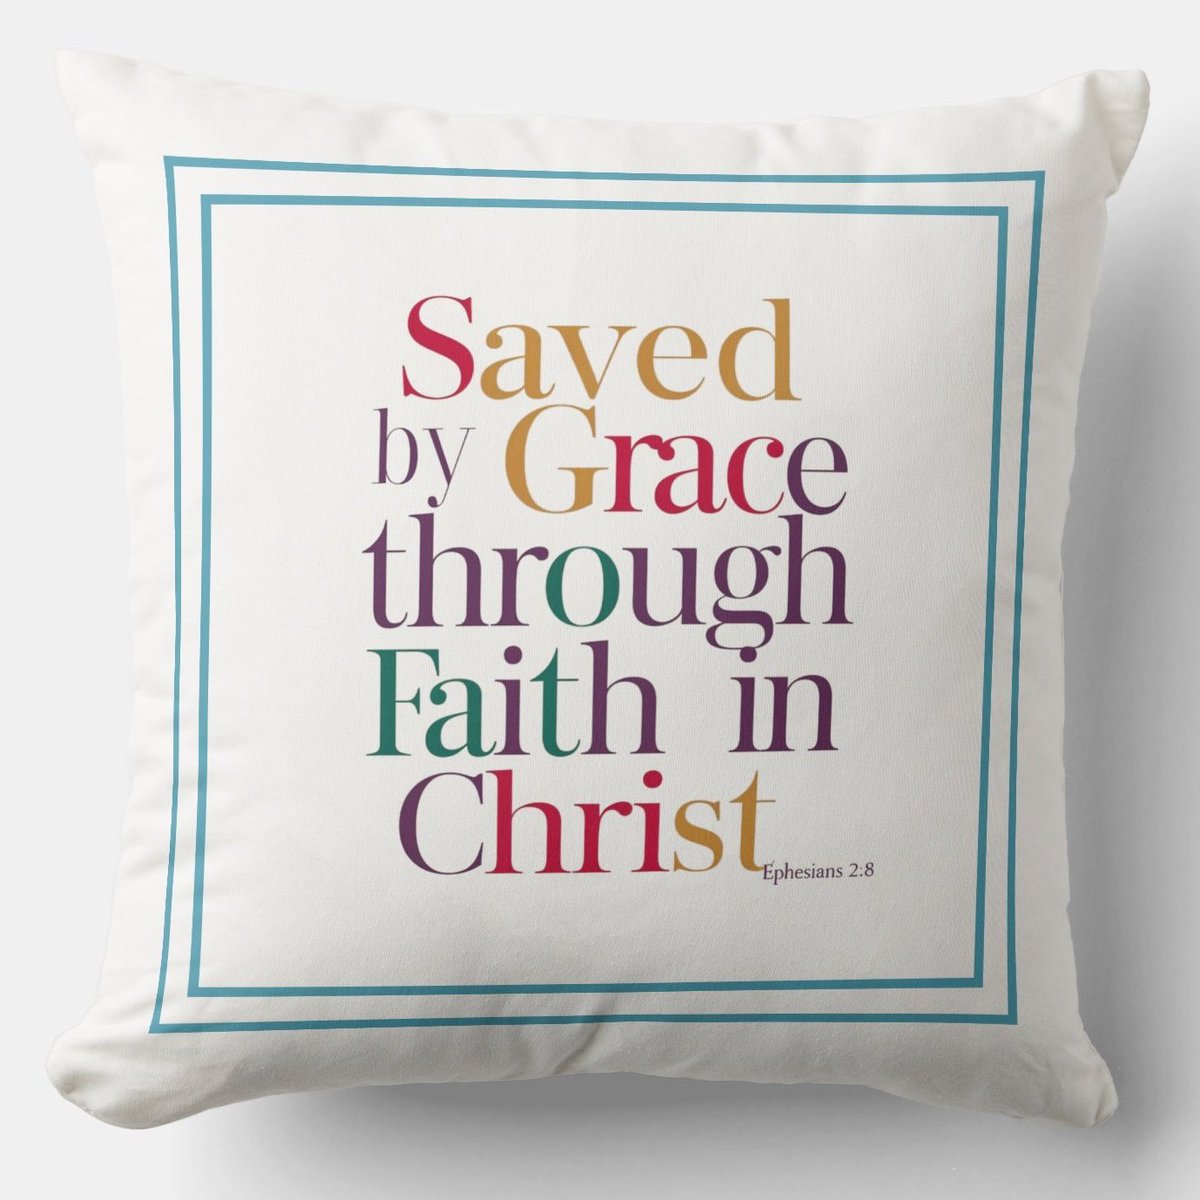 Saved By Grace Through Faith in Christ #Cushion zazzle.com/saved_by_grace… / #Pillow #Blessing #JesusChrist #JesusSaves #Jesus #christian #spiritual #Homedecoration #uniquegift #giftideas #MothersDayGifts #giftformom #giftidea #HolySpirit #pillows #giftshop #giftsforher #giftsformom